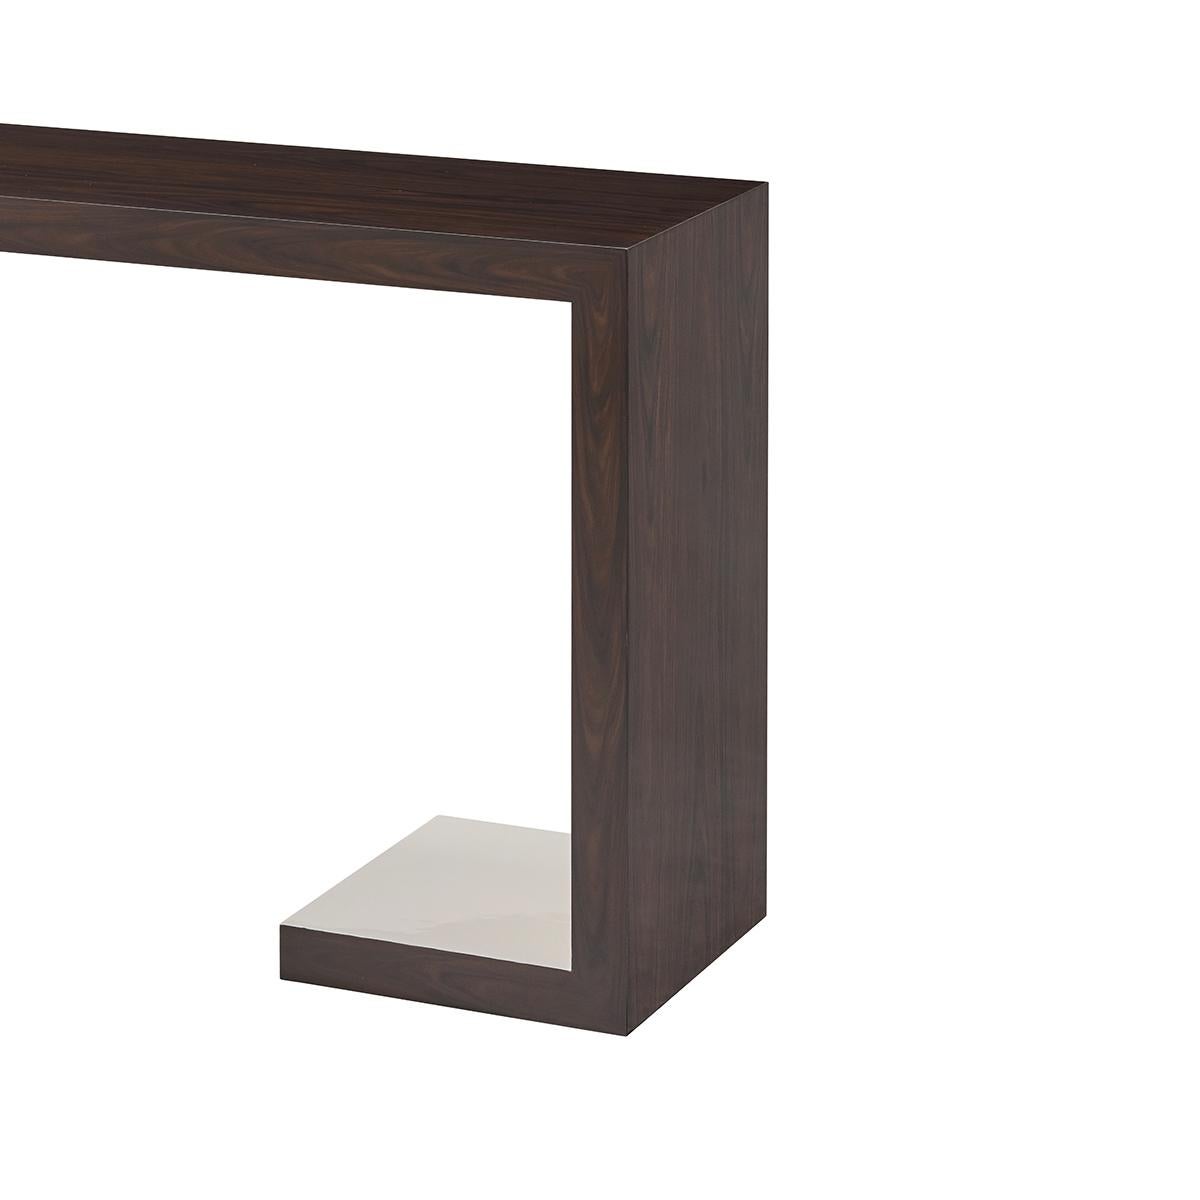 Simple and elegant, this modern console table with framed with a Morado veneered exterior and has an interior finish of painted morning white lacquer.

Dimensions: 65